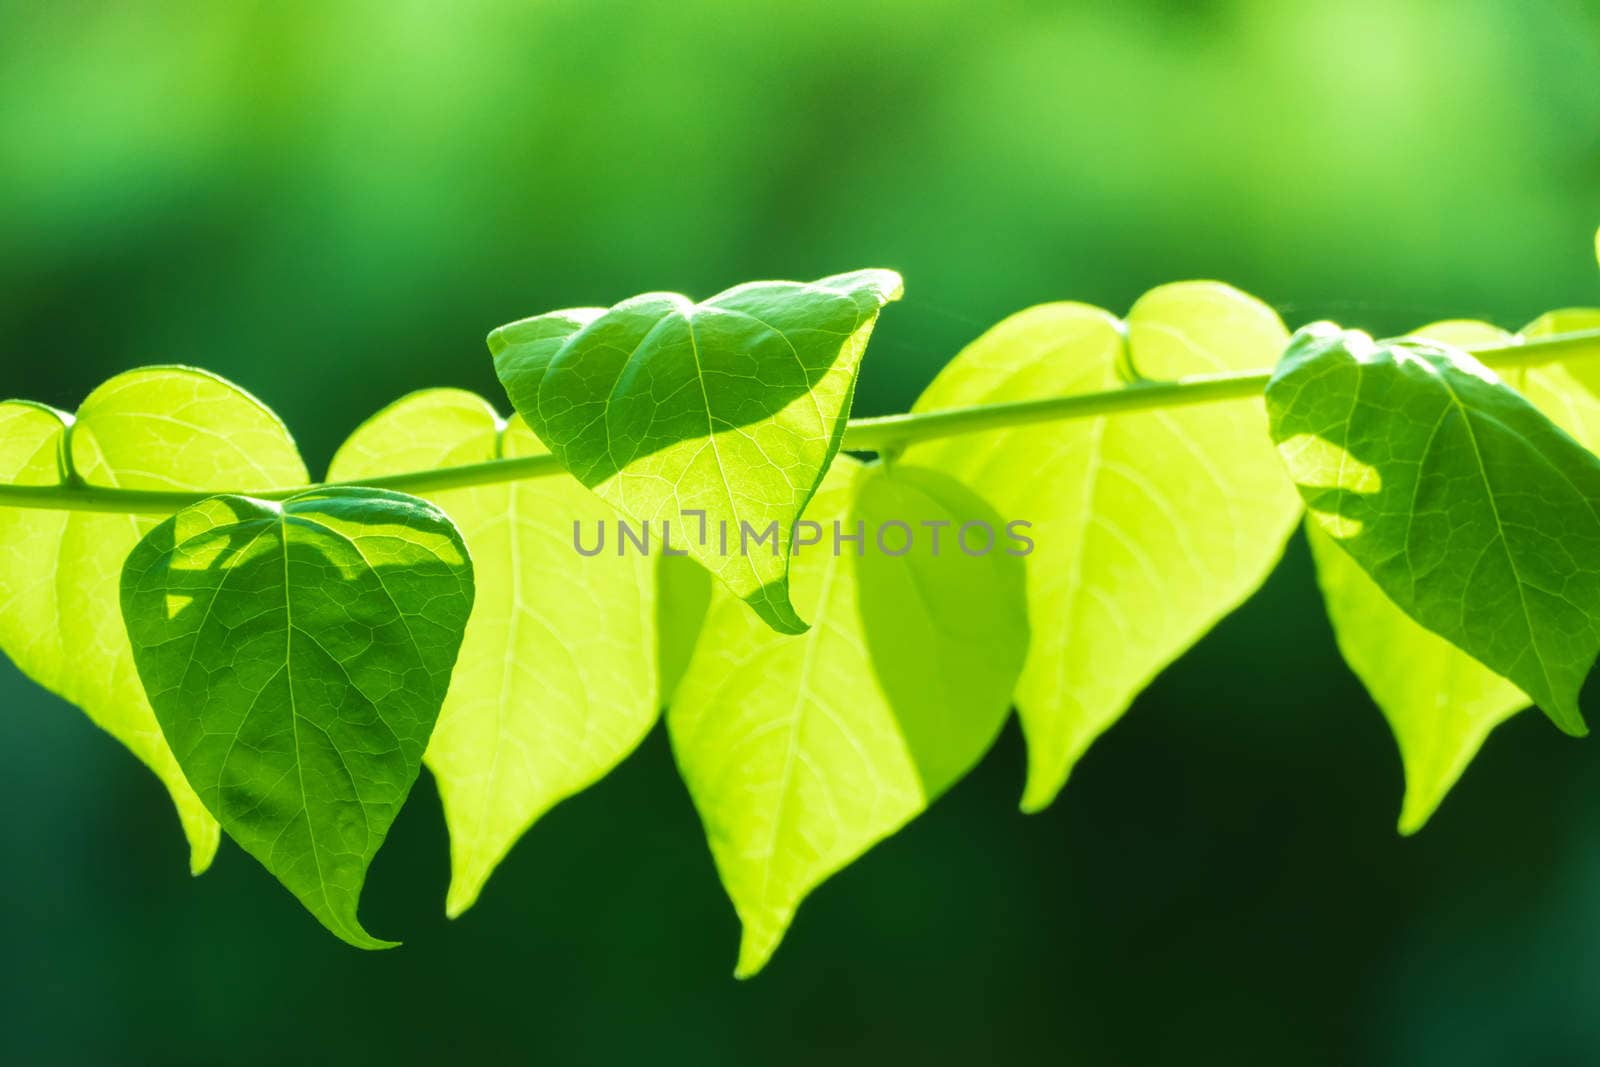 Tree branch over blurred green leaves background, nature background